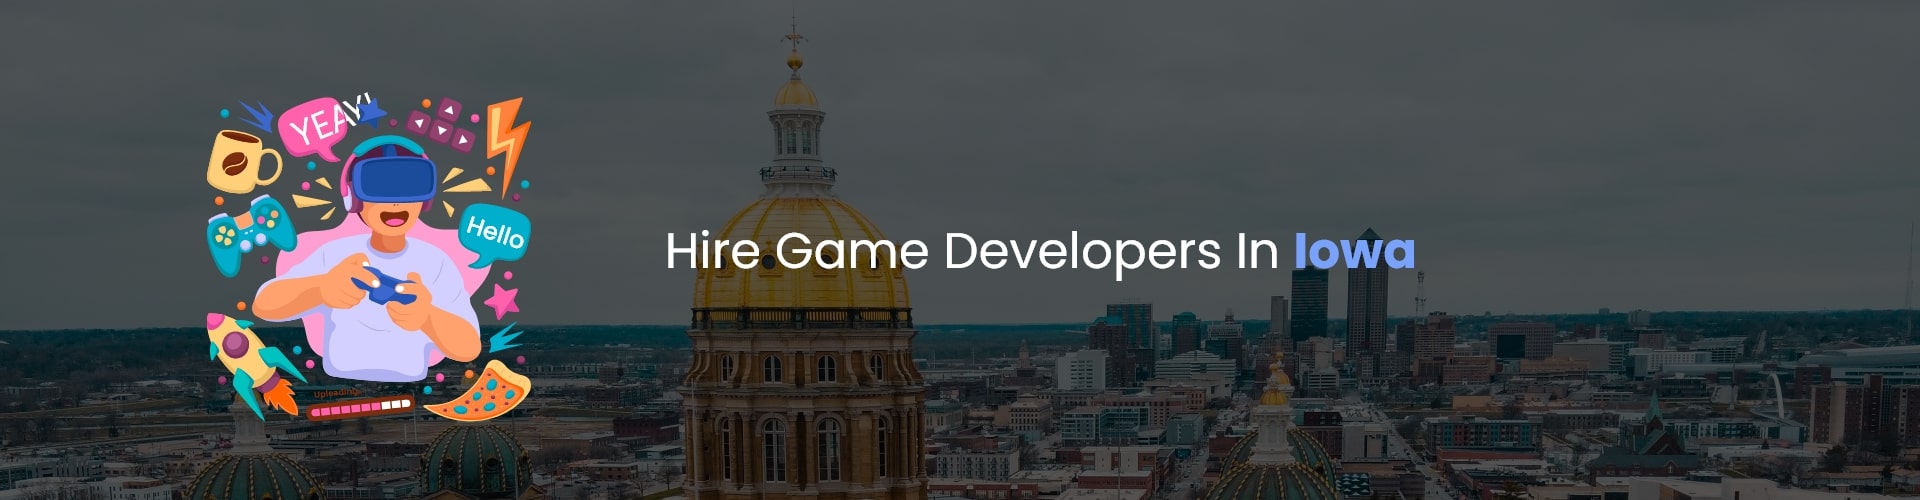 hire game developers in iowa